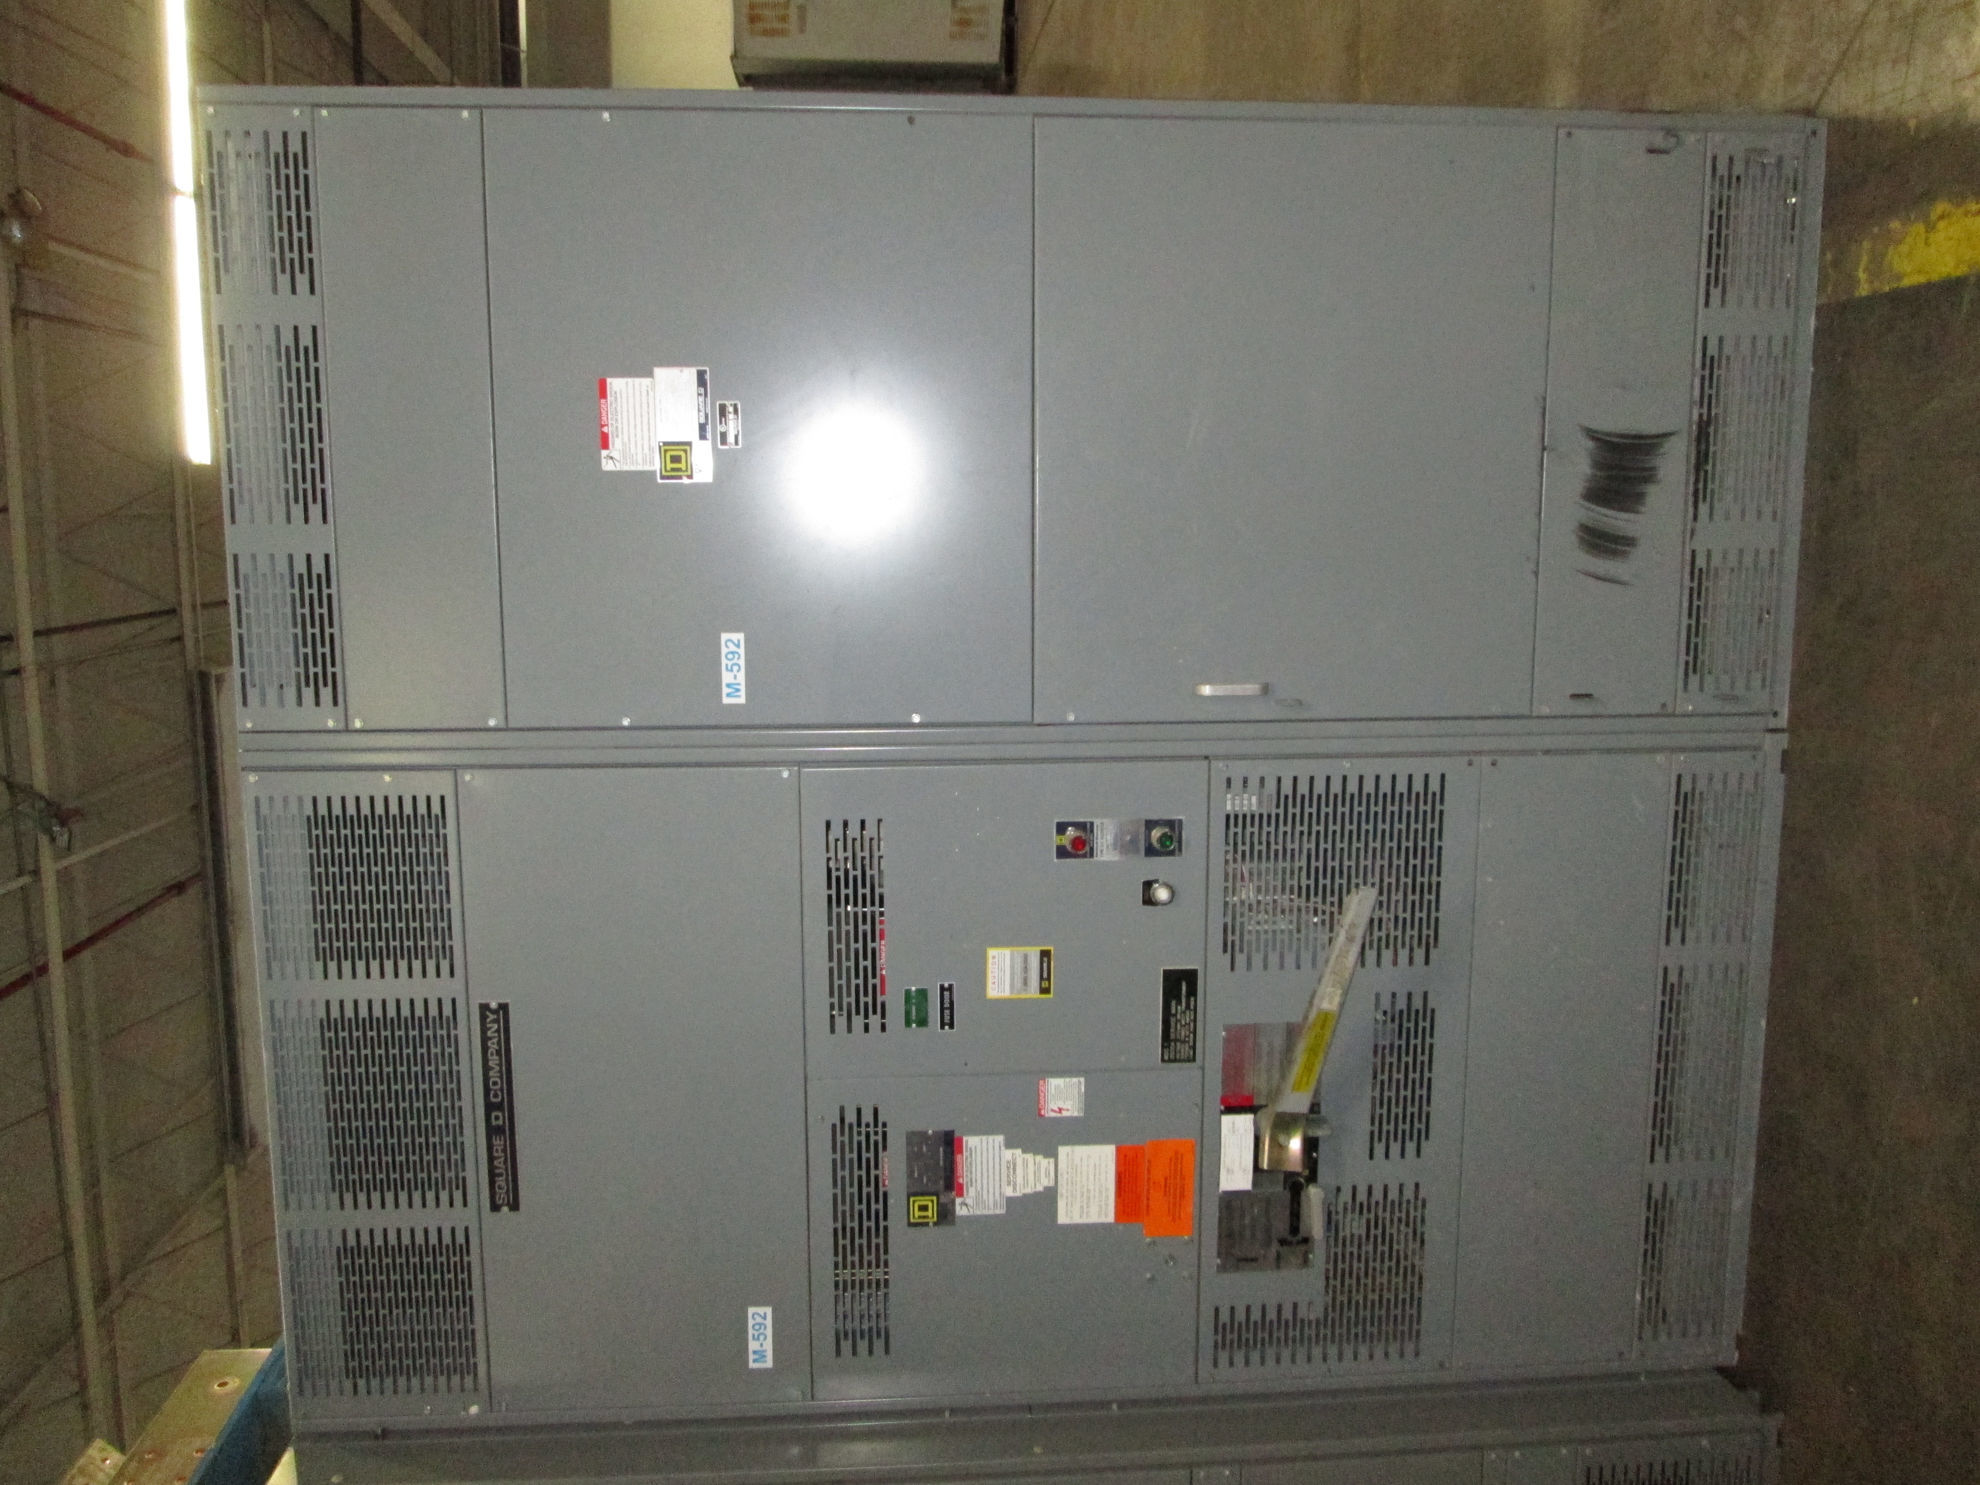 Picture of Square D Power Style Switchboard 3000 Amp Fusible Main 480Y/277 Volt w/ GFI NEMA 1 R&G